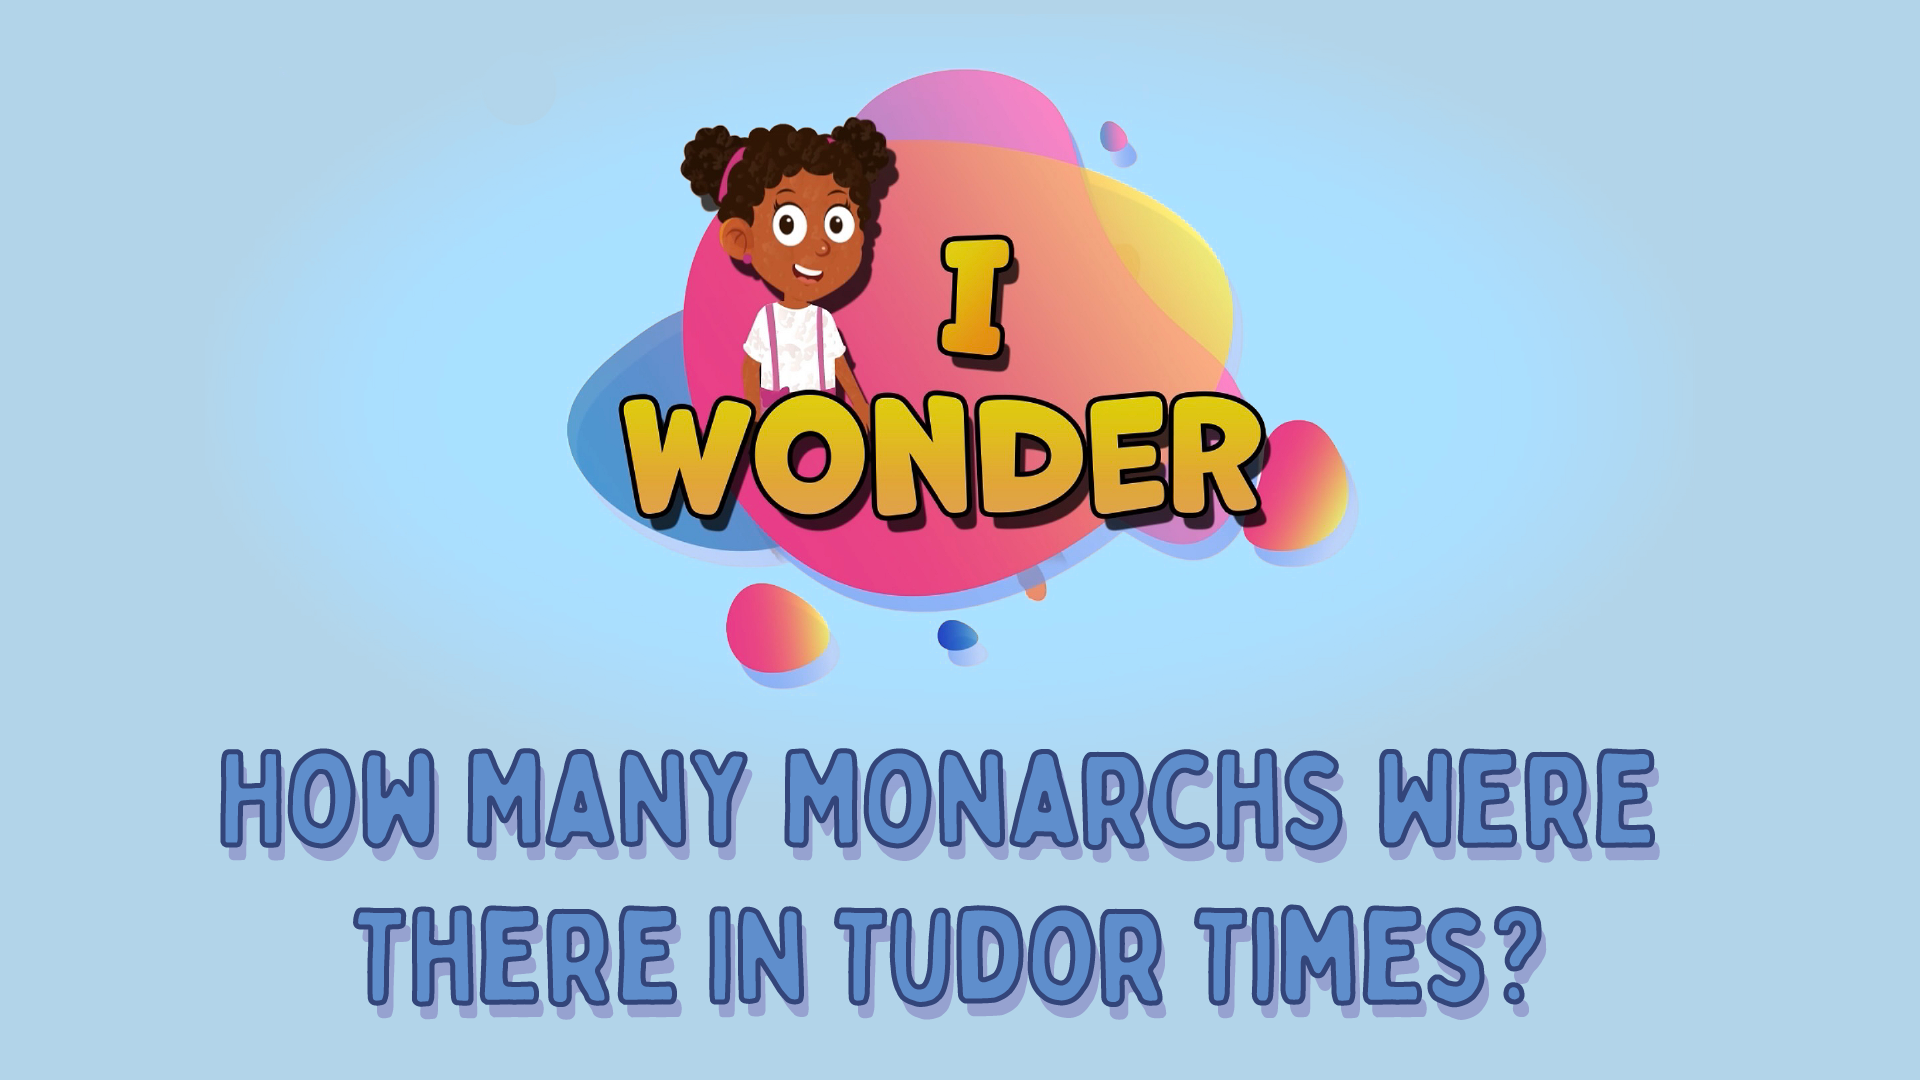 How Many Monarchs Were There In Tudor Times?